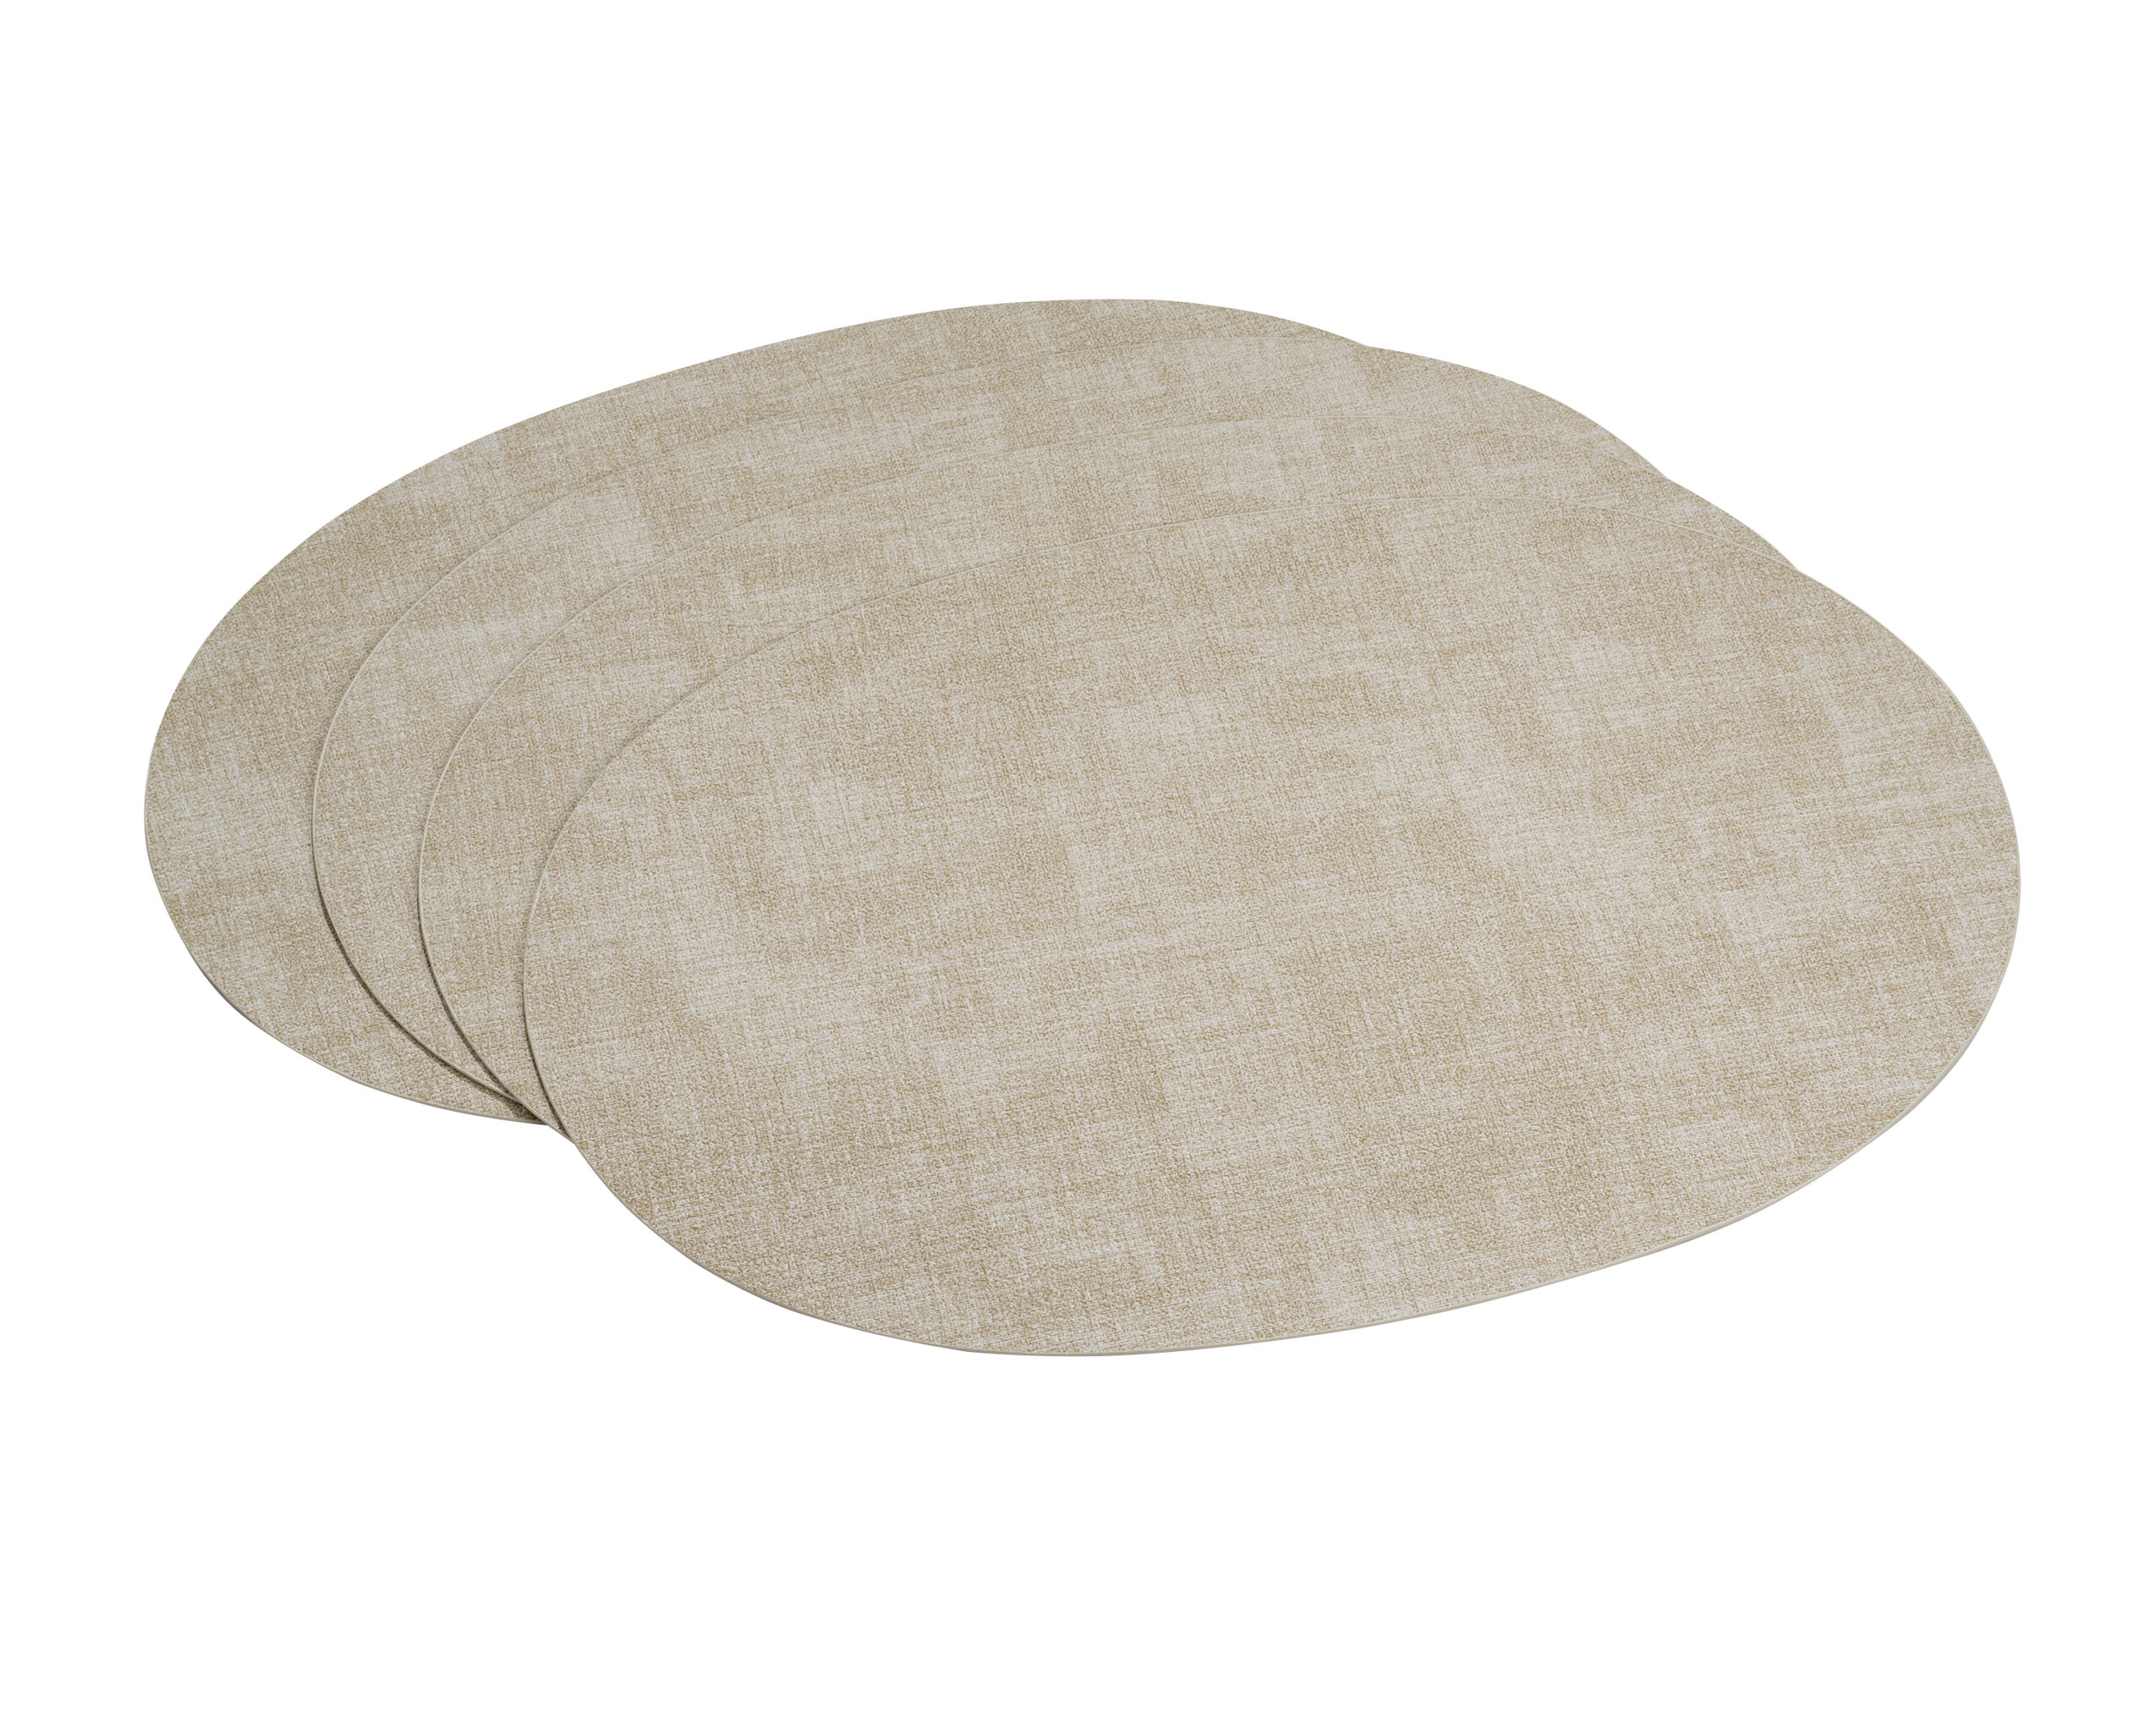 Placemat Vegan Leather - Ovaal 48x 32 - Beige